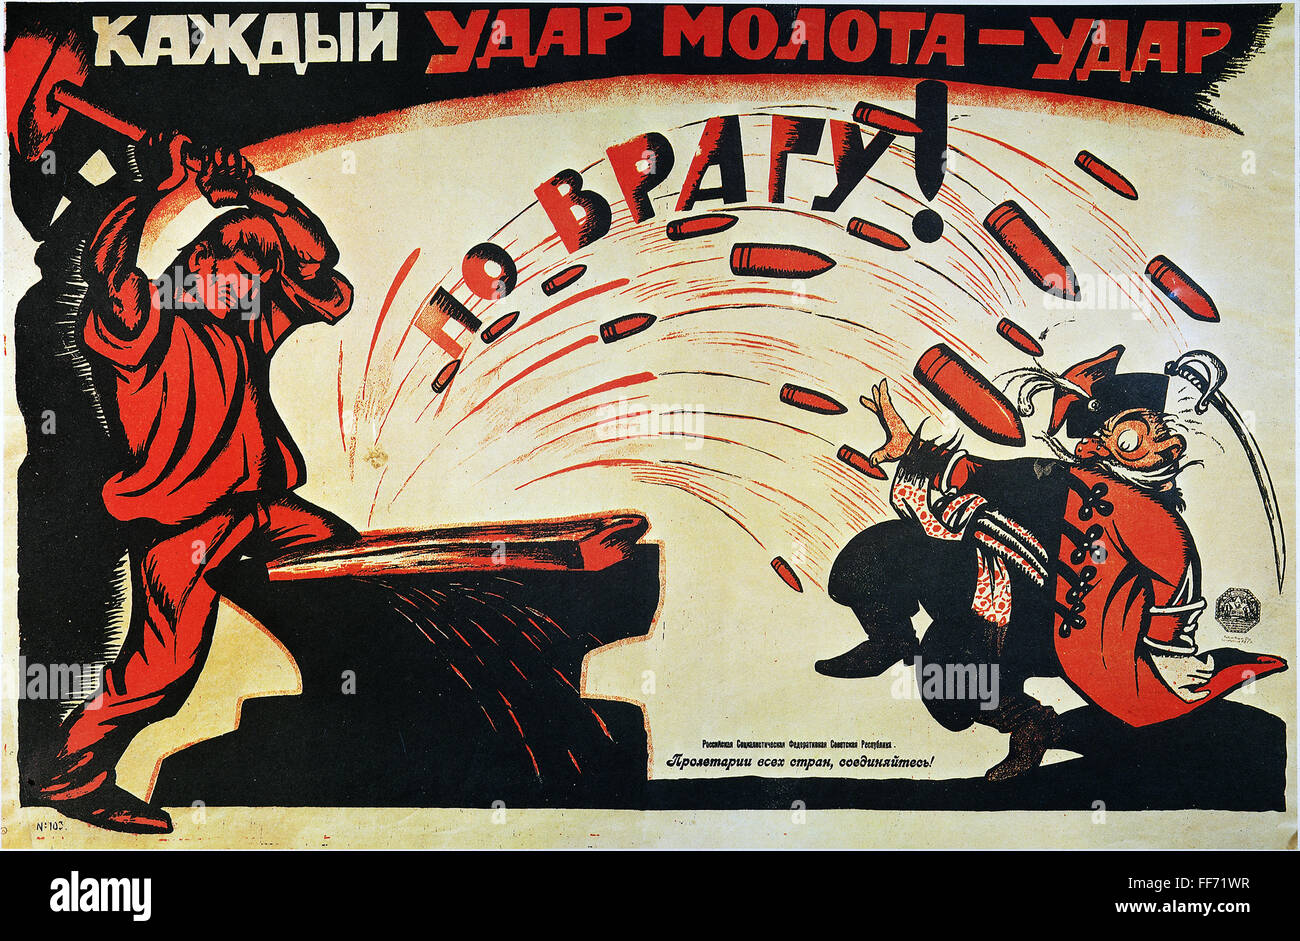 Translated Russian Anti-Capitalist Poster Knowledge breaks chains of slavery 